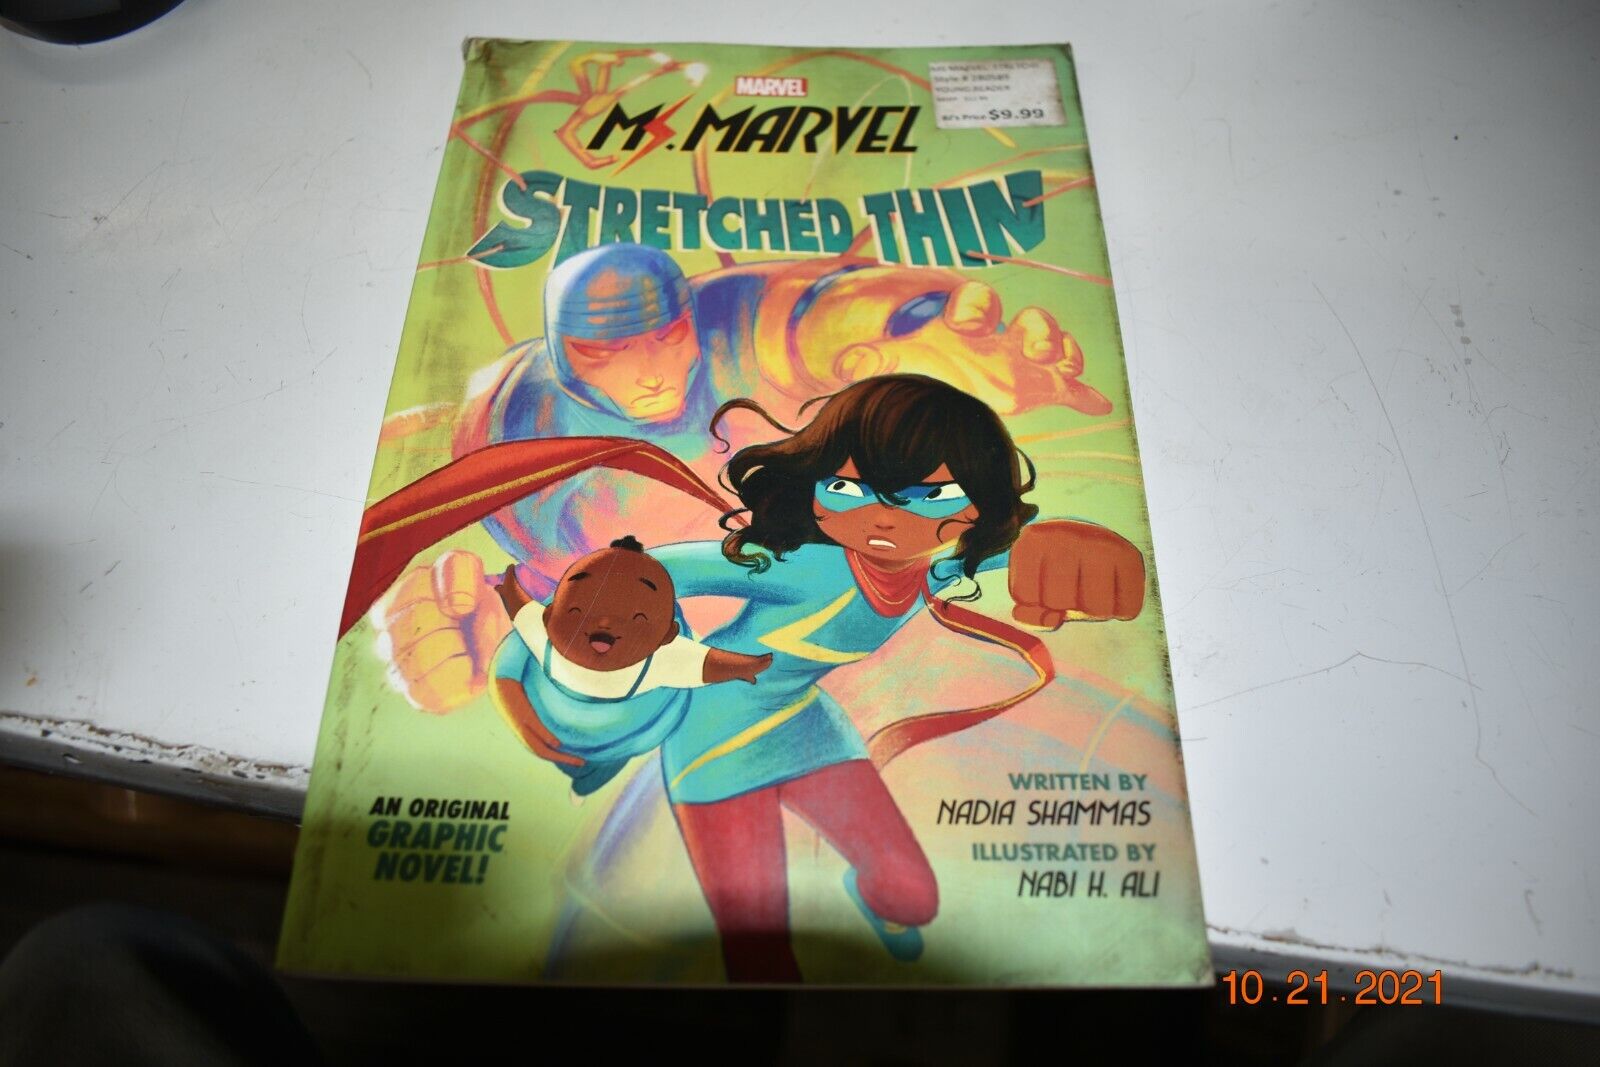 Marvel Uncorrected Proof Book Stretched Thin 